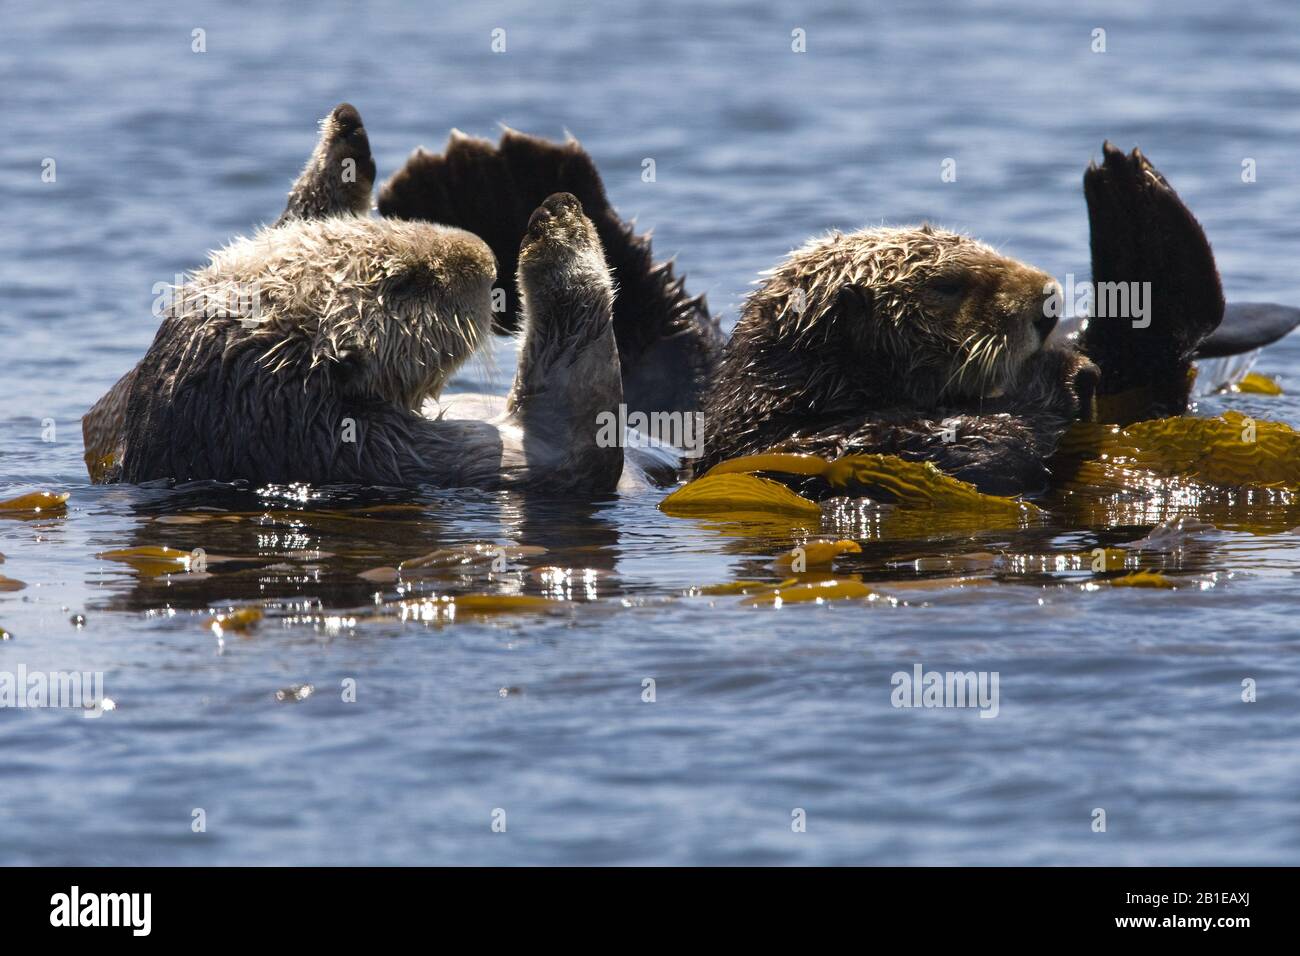 sea otter (Enhydra lutris), two otters at the water surface, USA, California Stock Photo